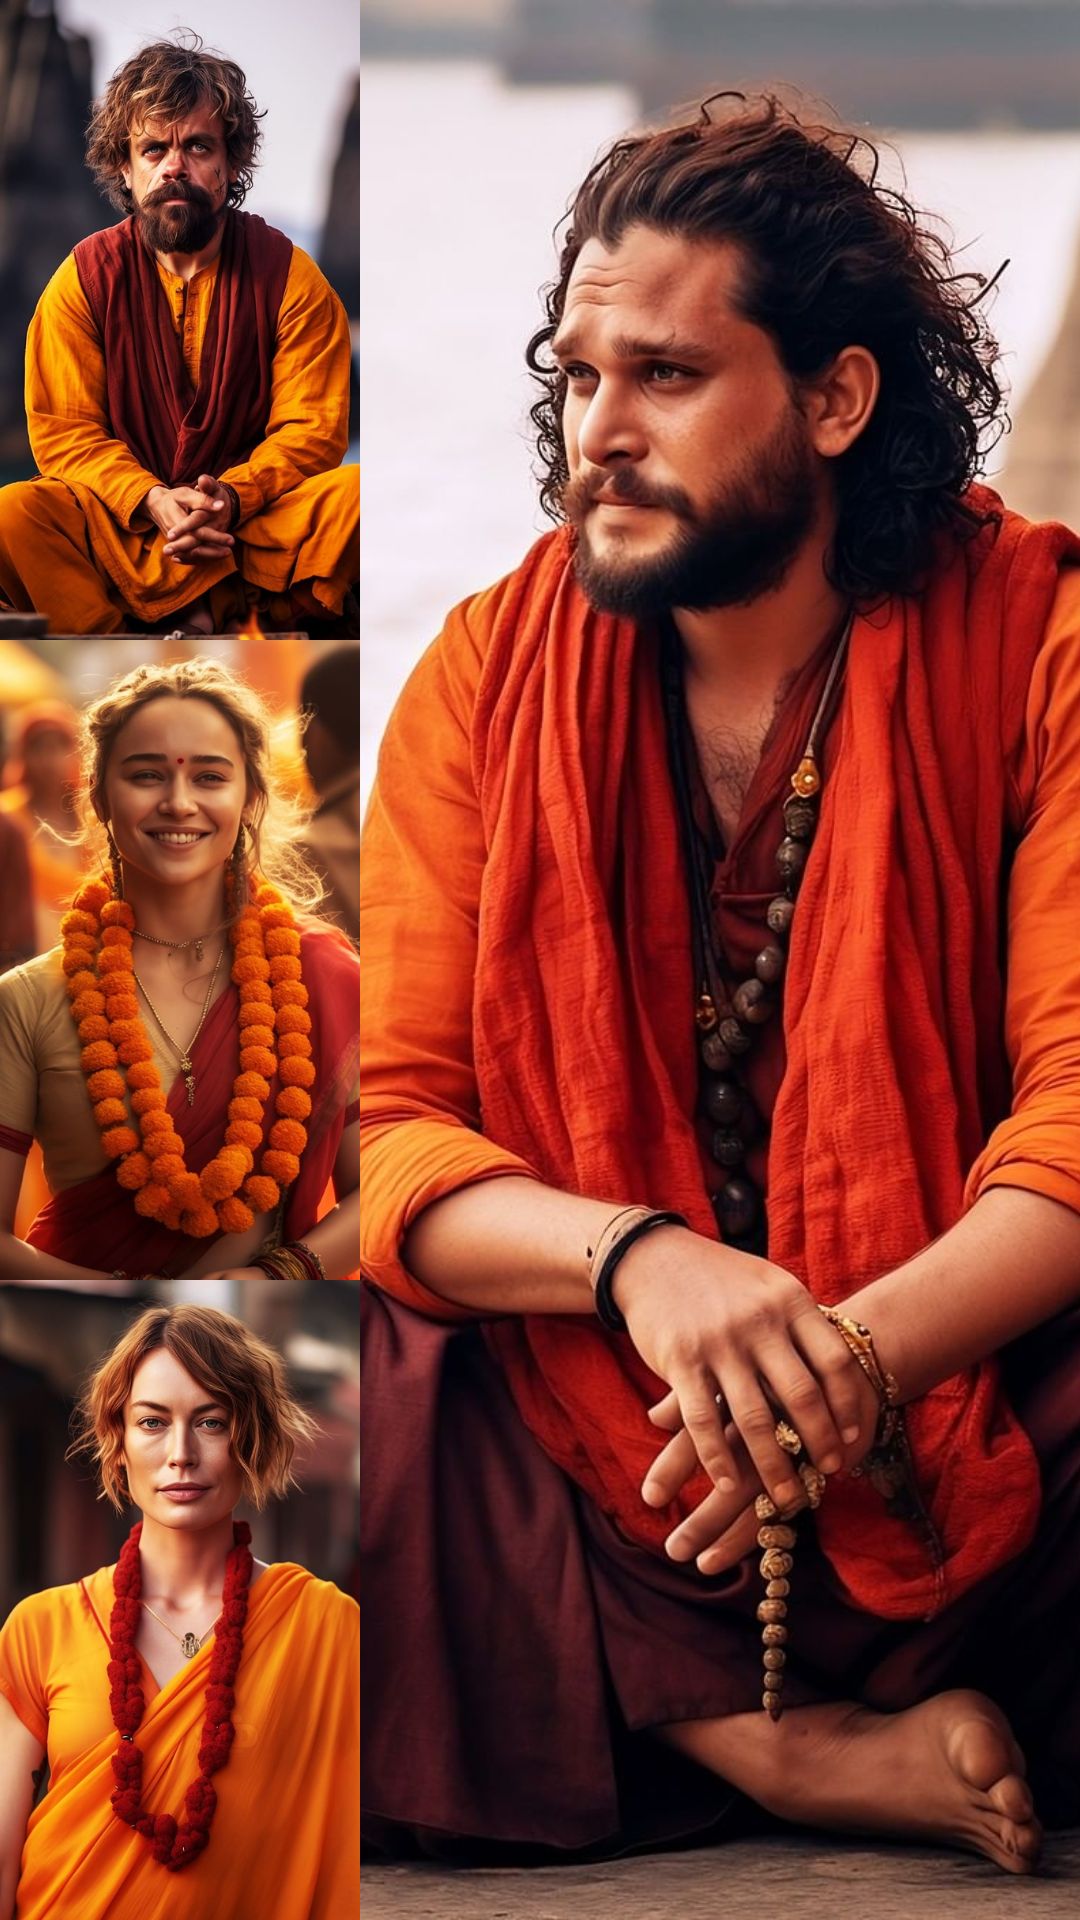 Game of Thrones Characters on a Spiritual Journey in Varanasi - AI Images